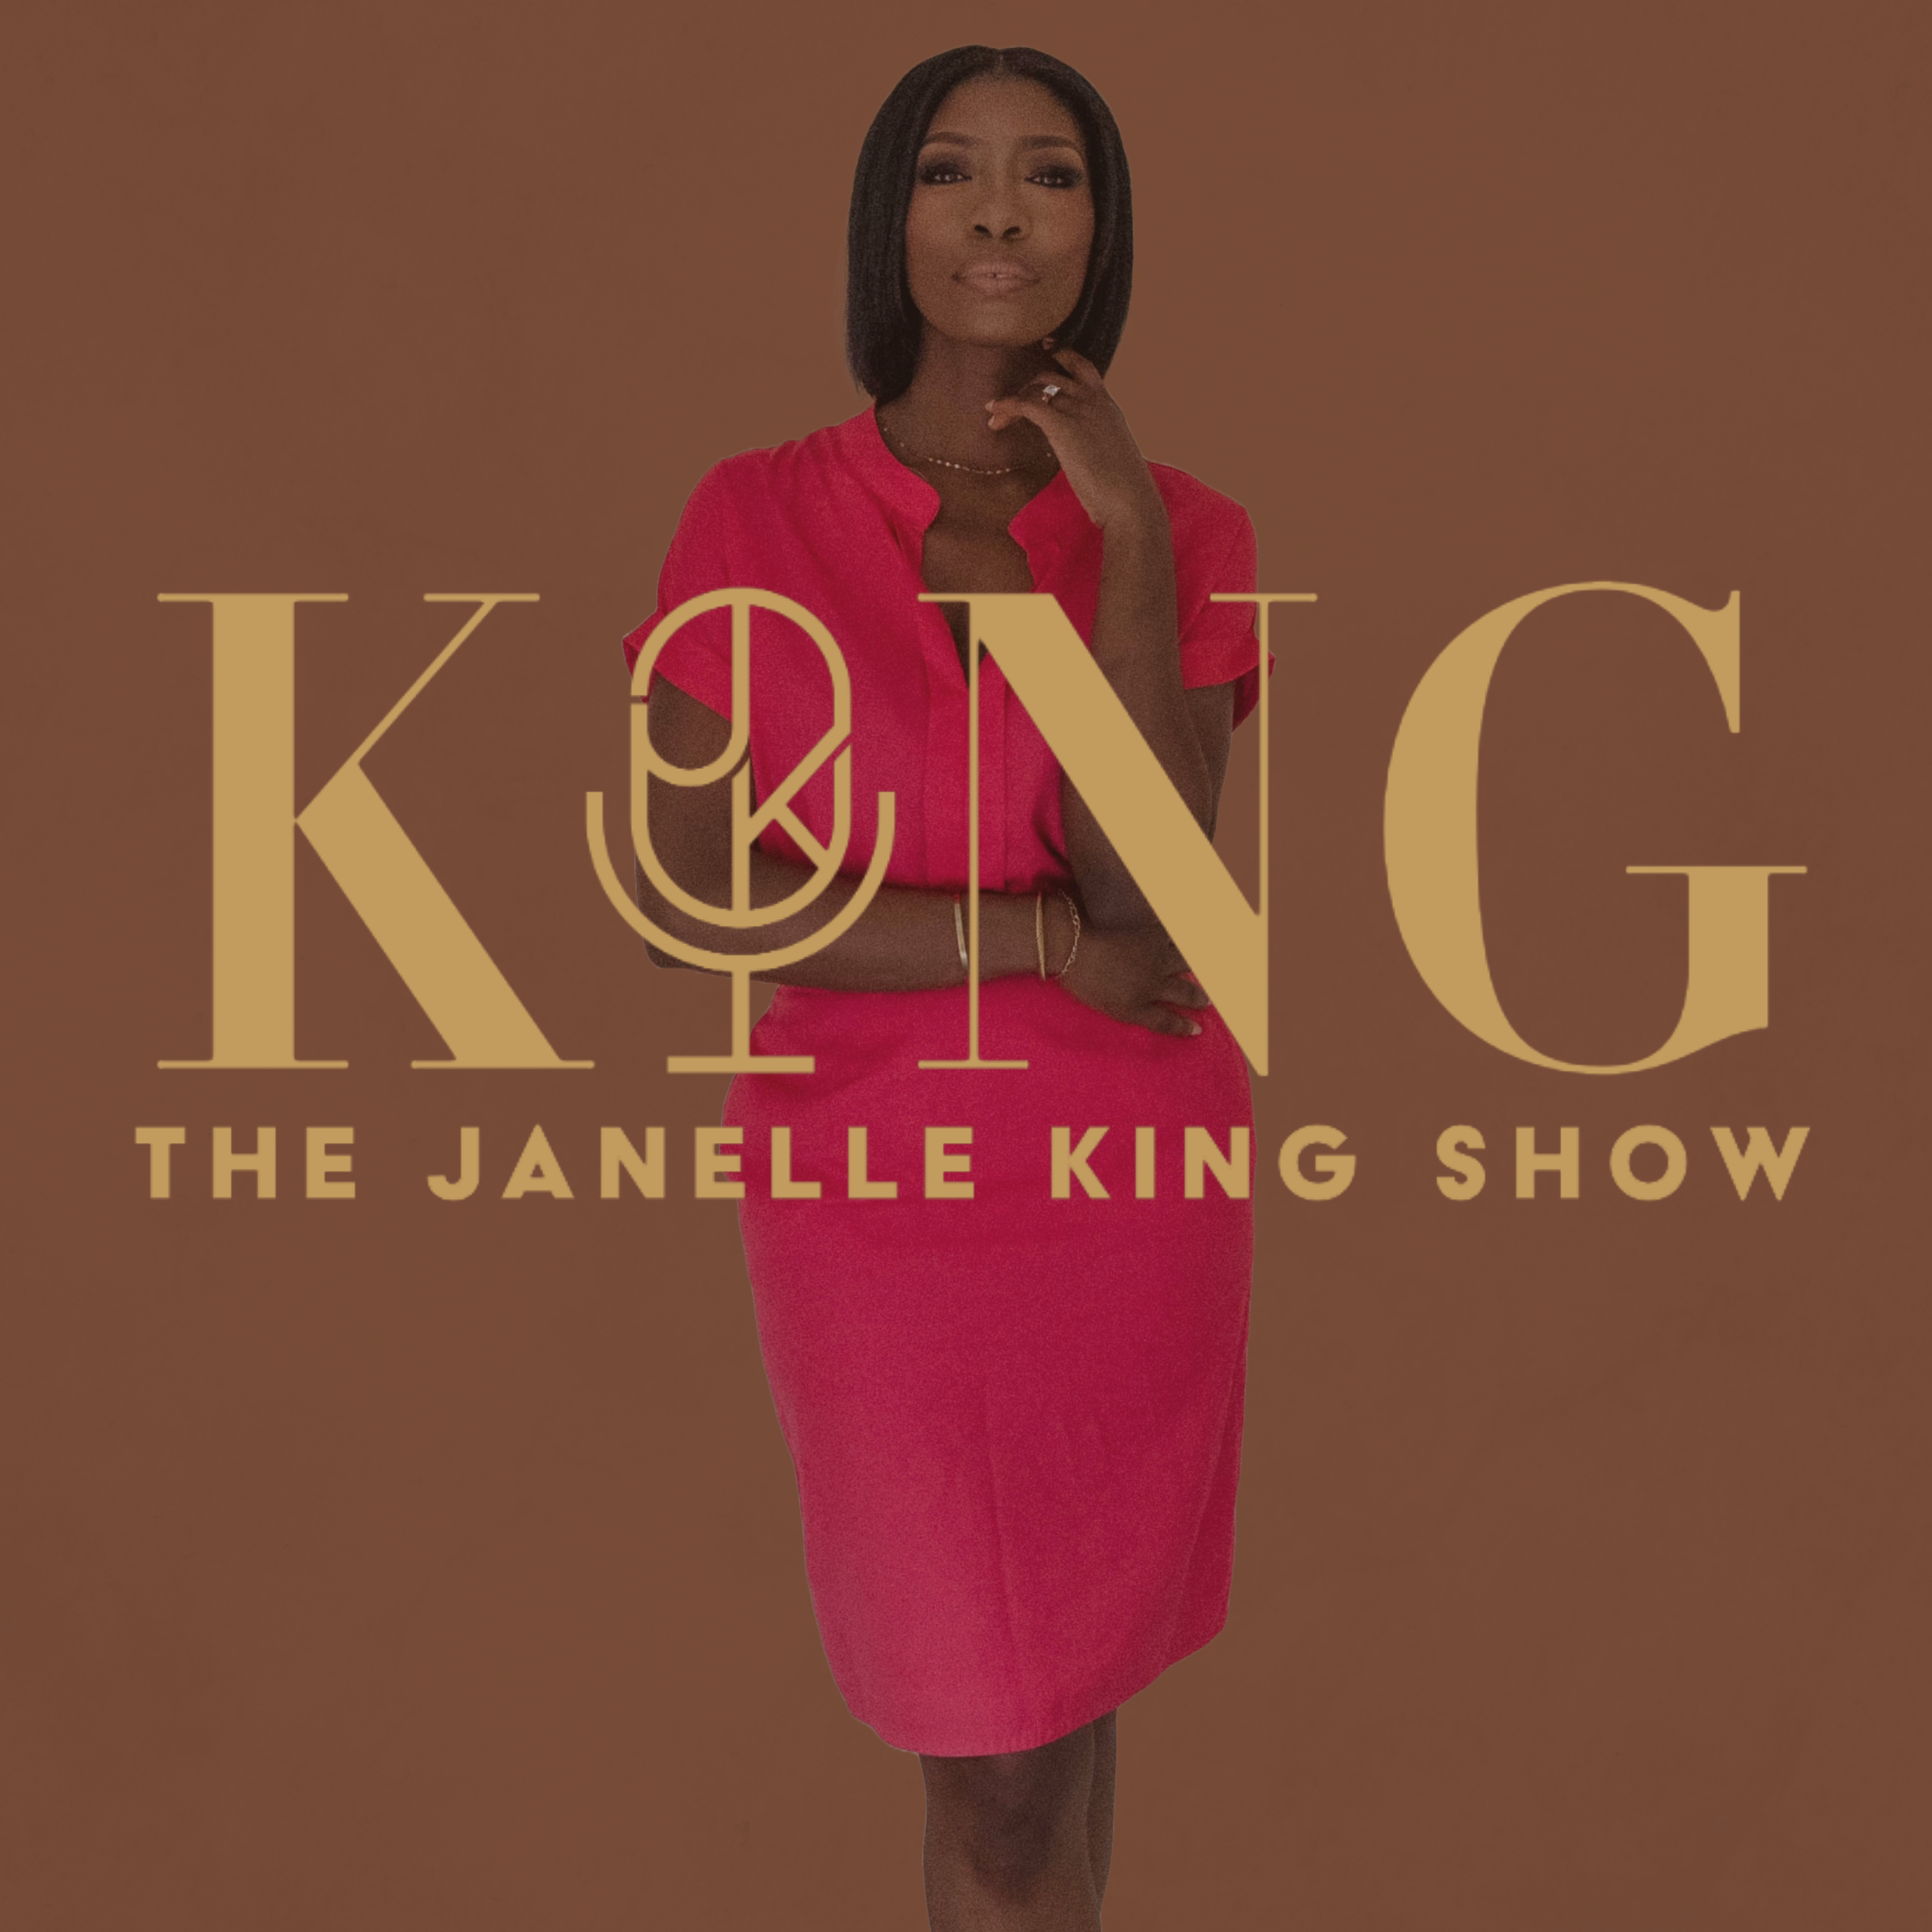 The Janelle King Show Hot Topics